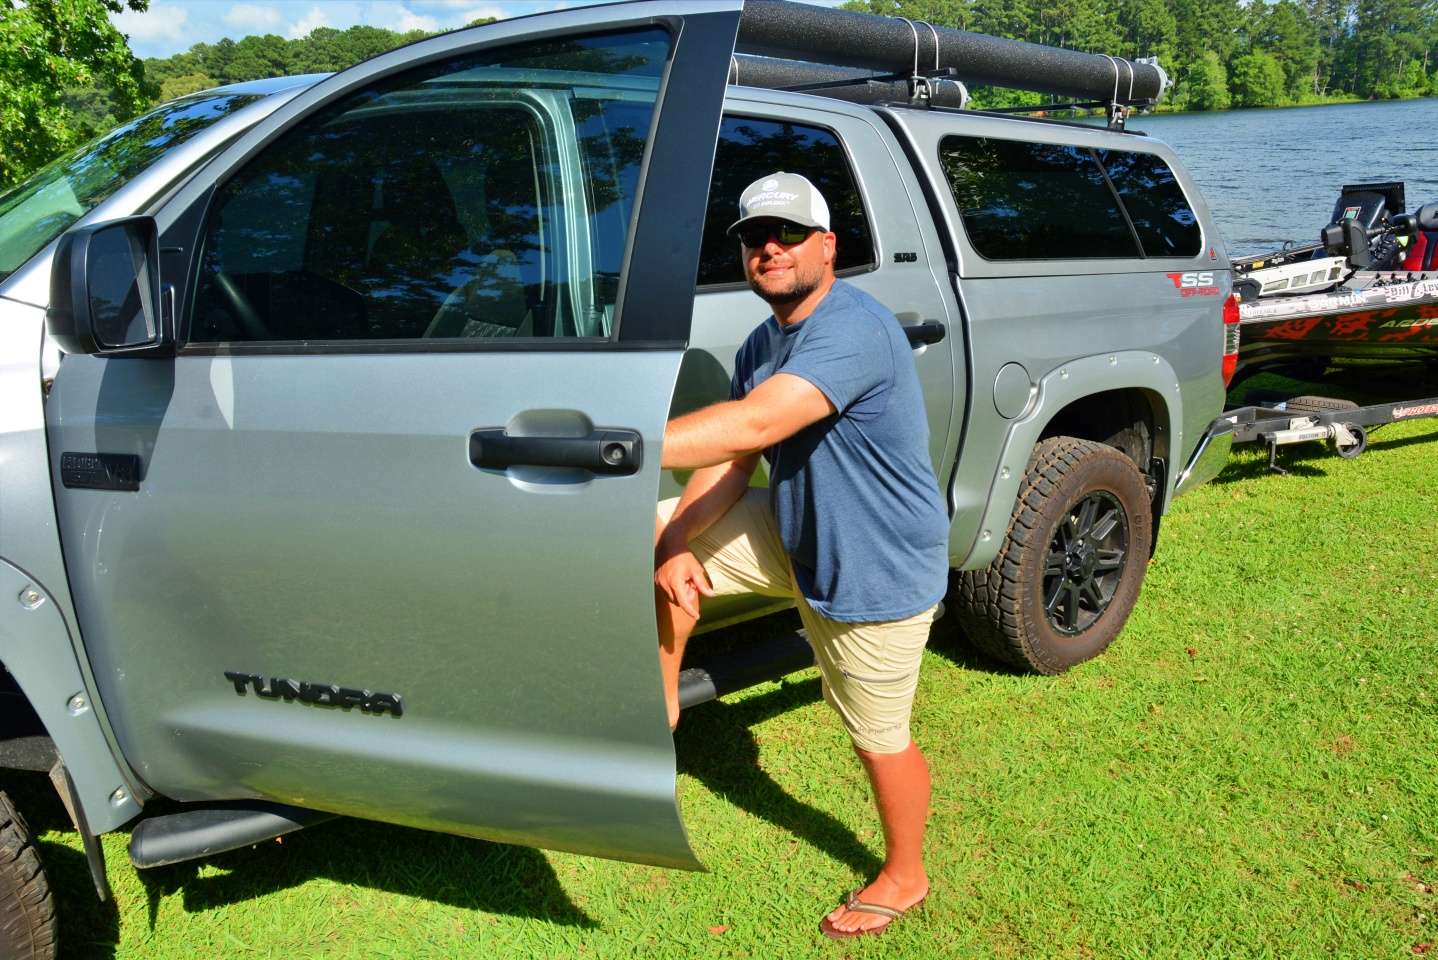 B.A.S.S. Elite Series pro Brock Mosley values the longevity and power of his 2019 Toyota Tundra SRS TXX 4x4 CrewMax. He puts close to 30,000 miles on his Tundra while fishing the Bassmaster Elite Series. It has power to pull so it doesnât bog down when pulling hills and mountains. Itâs just extremely reliable.